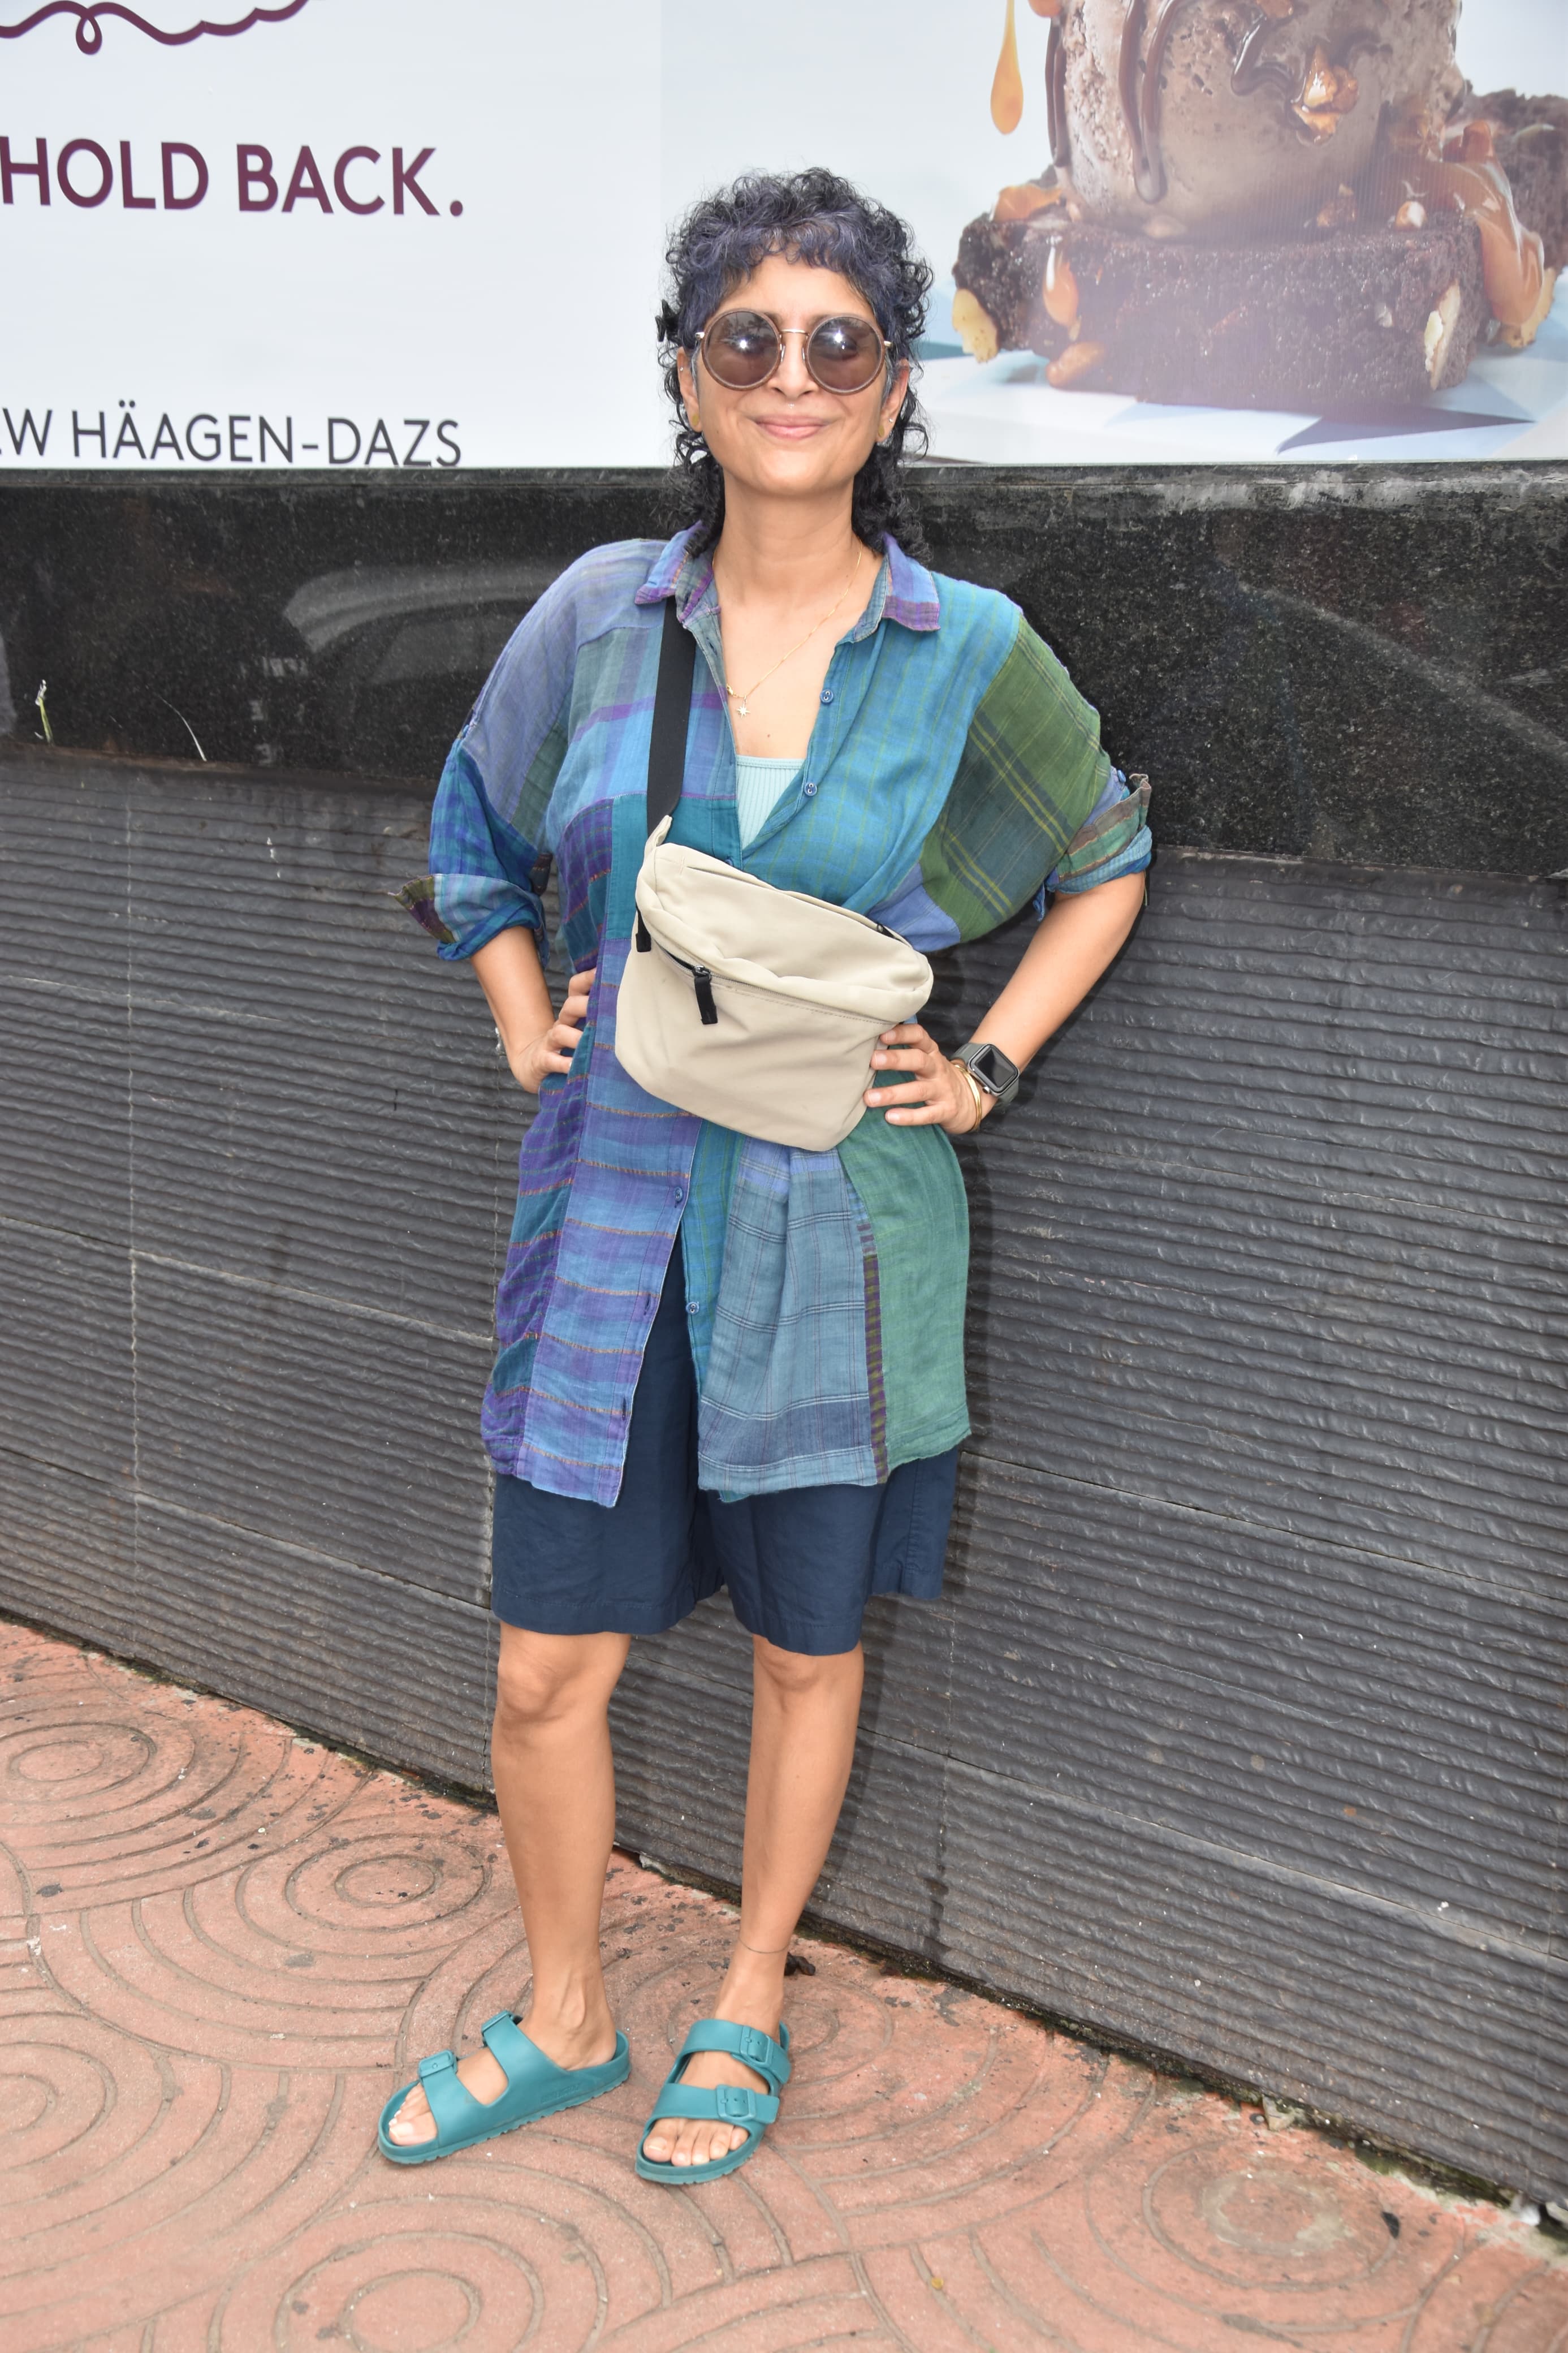 Aamir Khan's ex-wife Kiran Rao was spotted in the city